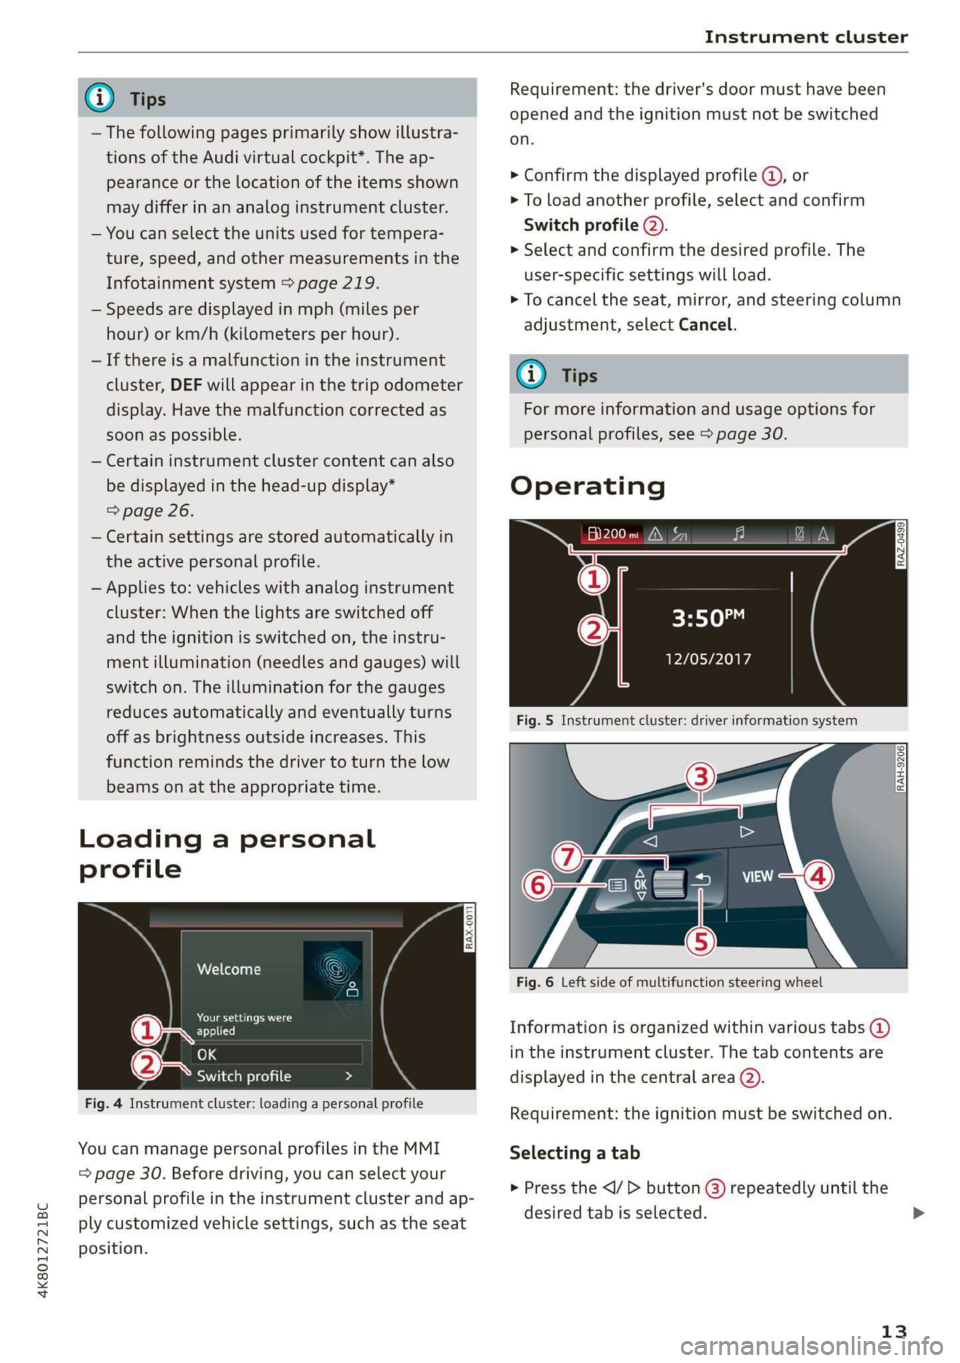 AUDI A7 2020  Owners Manual 4K8012721BC 
Instrument cluster 
  
@) Tips 
— The following pages primarily show illustra- 
tions of the Audi virtual cockpit*. The ap- 
pearance or the location of the items shown 
may differ in a